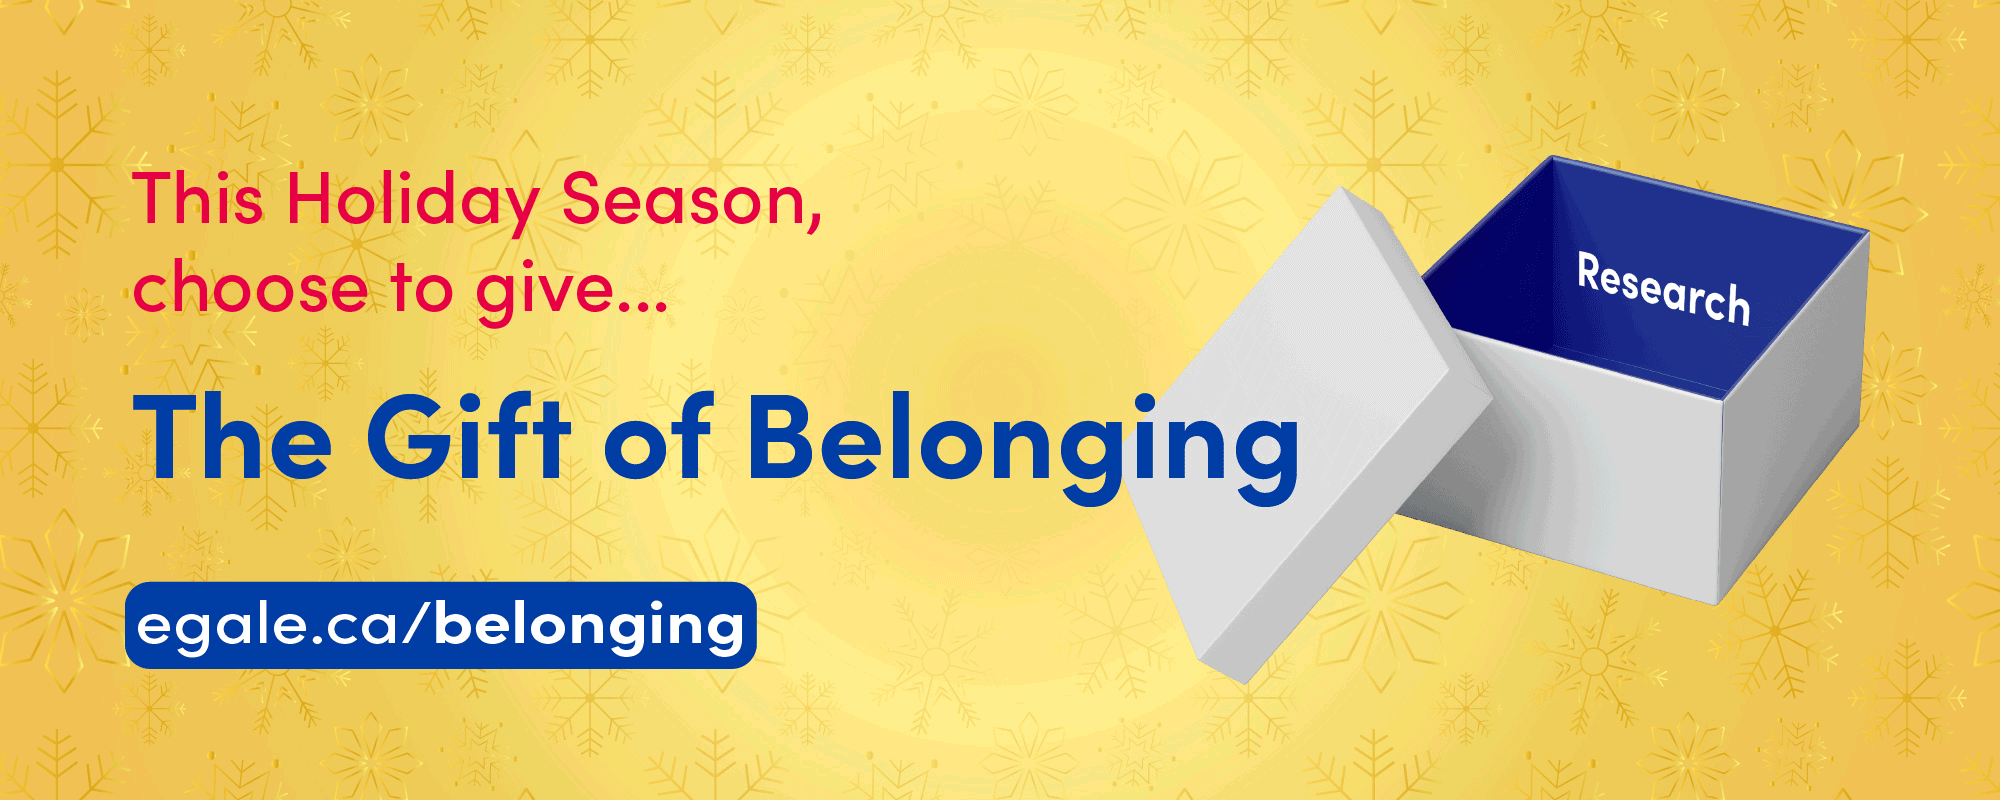 This Holiday Season, choose to give... The Gift of Belonging.